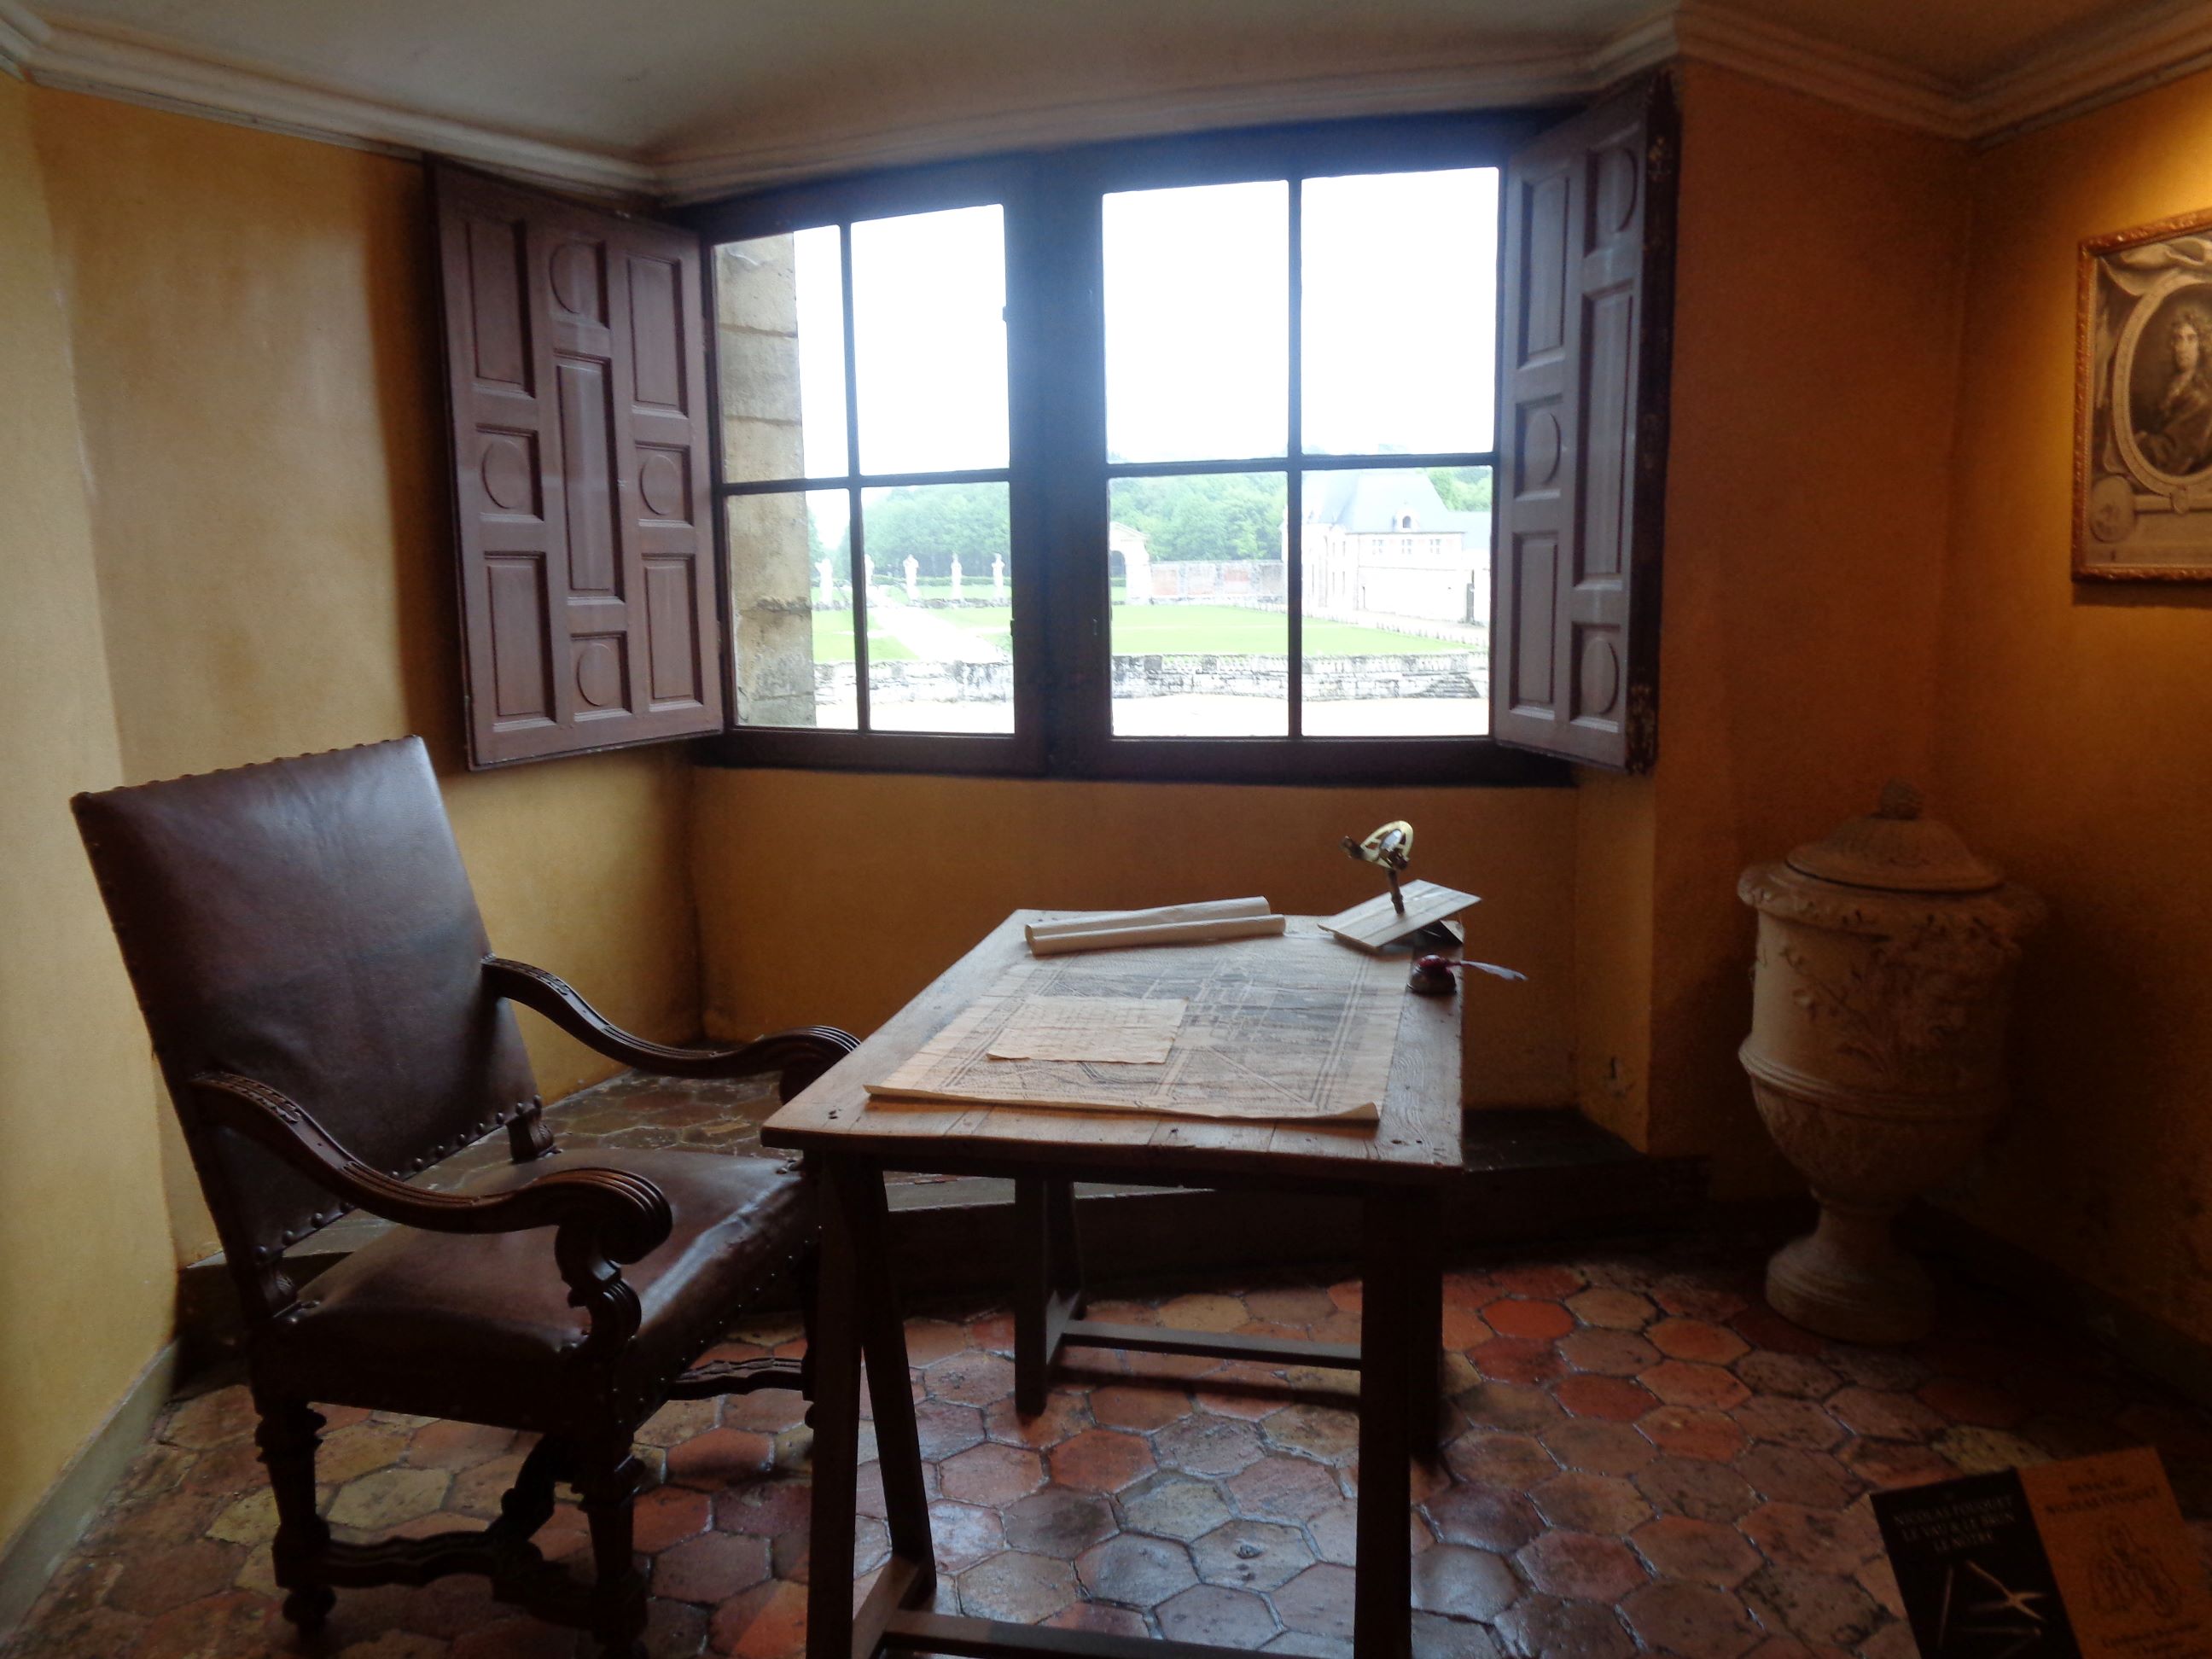 Vaux le Vicomte castle working room may23